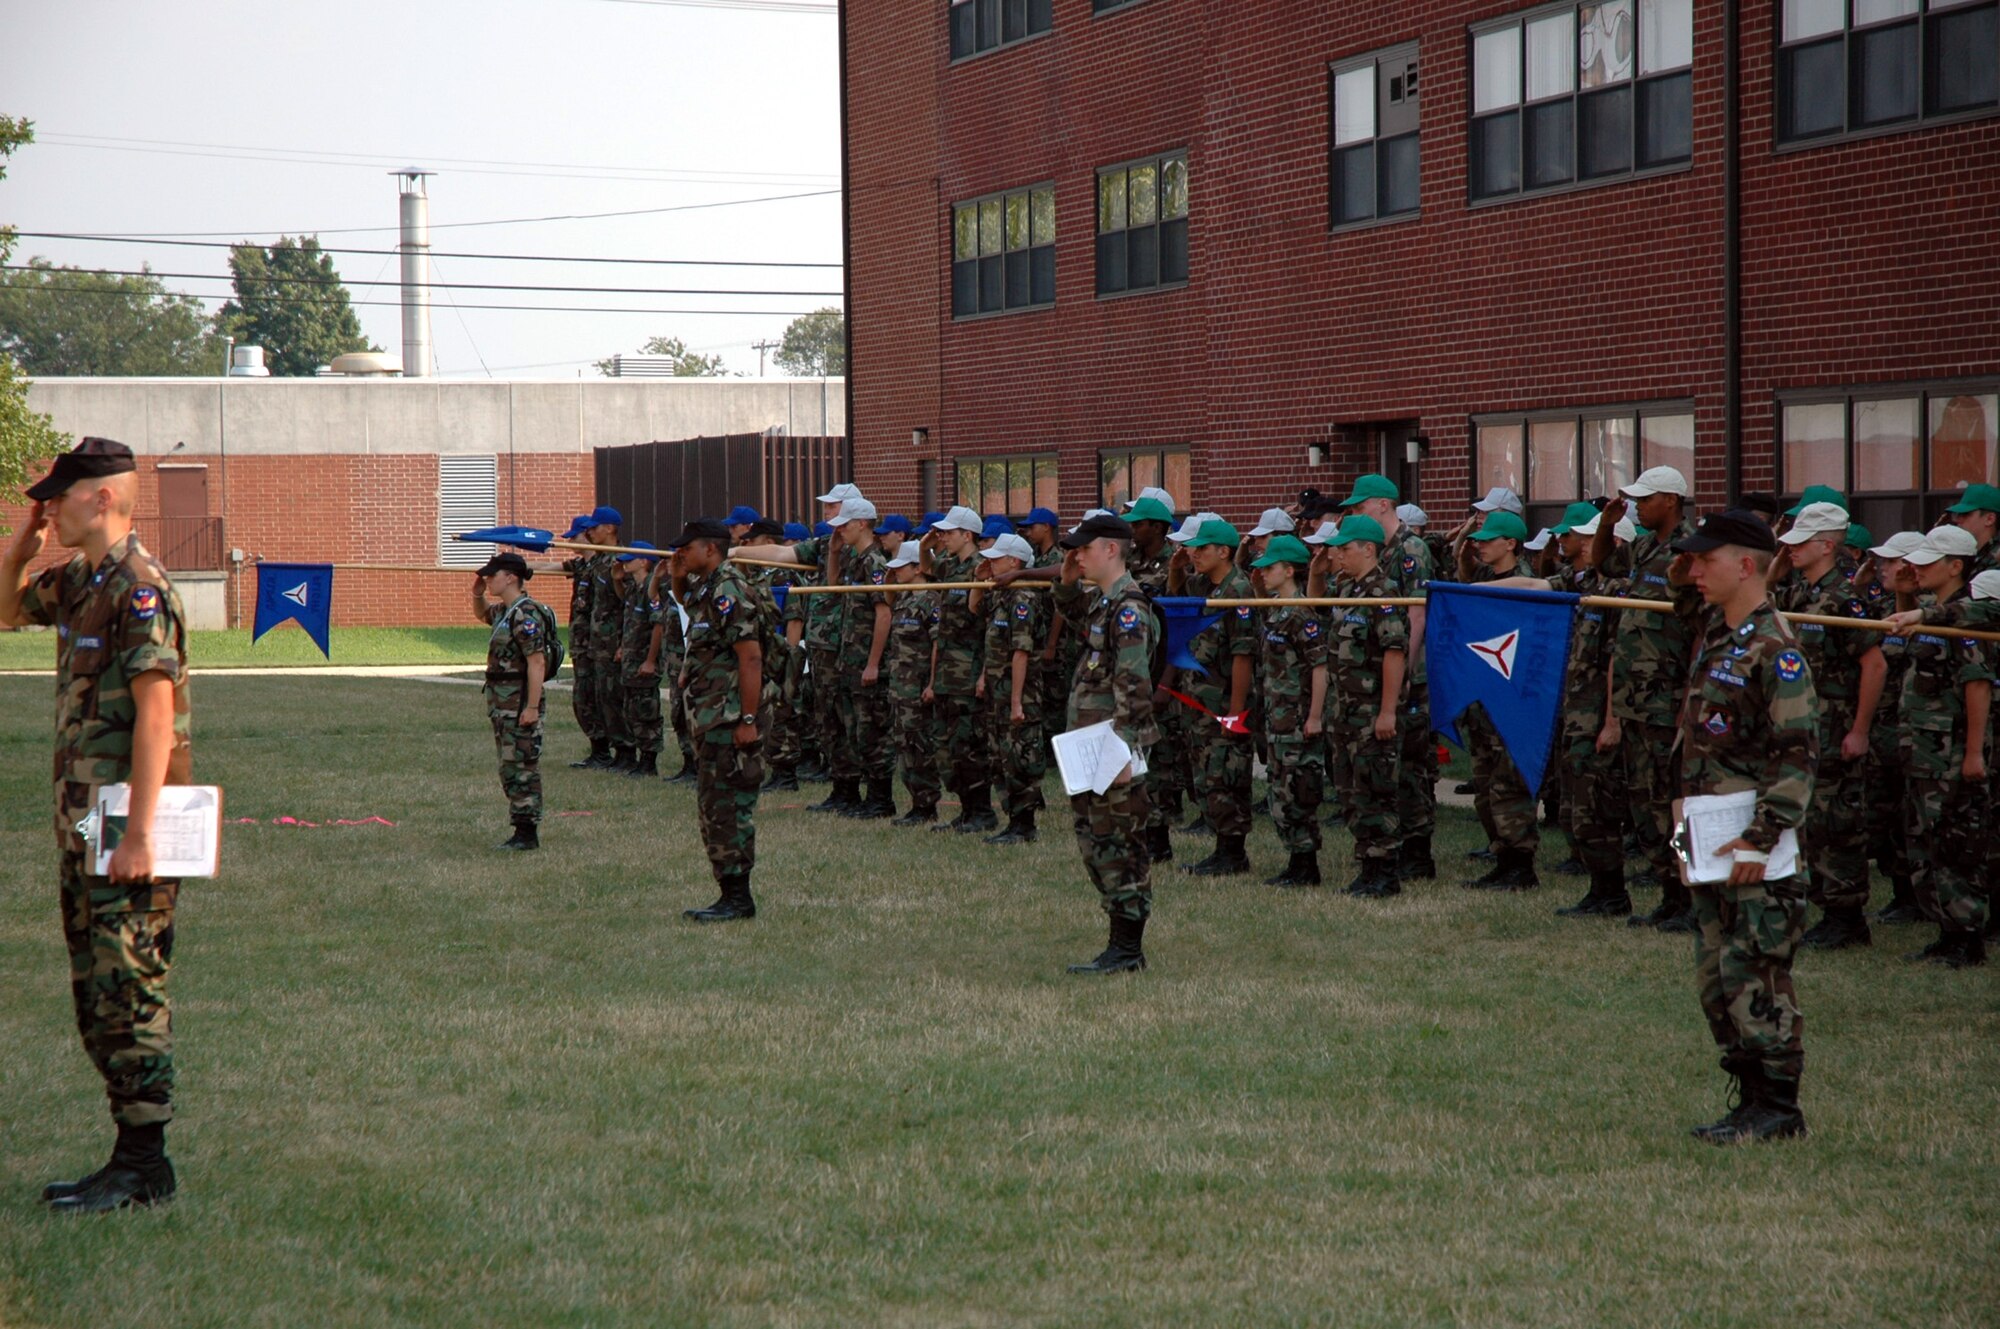 Civil Air Patrol cadets from the New Jersey Civil Air Patrol Wing participate in a retreat ceremony marking the end of their duty day at the U.S. Air Force Expeditionary Center on Fort Dix, N.J., July 29, 2008.  Civil Air Patrol is a volunteer, non-profit auxiliary of the U.S. Air Force. Its missions are to develop its cadets, educate Americans on the importance of aviation and space, and perform life saving humanitarian missions. These cadets were holding their annual summer encampment with the New Jersey wing.  (U.S. Air Force photo/Staff Sgt. Paul R. Evans)